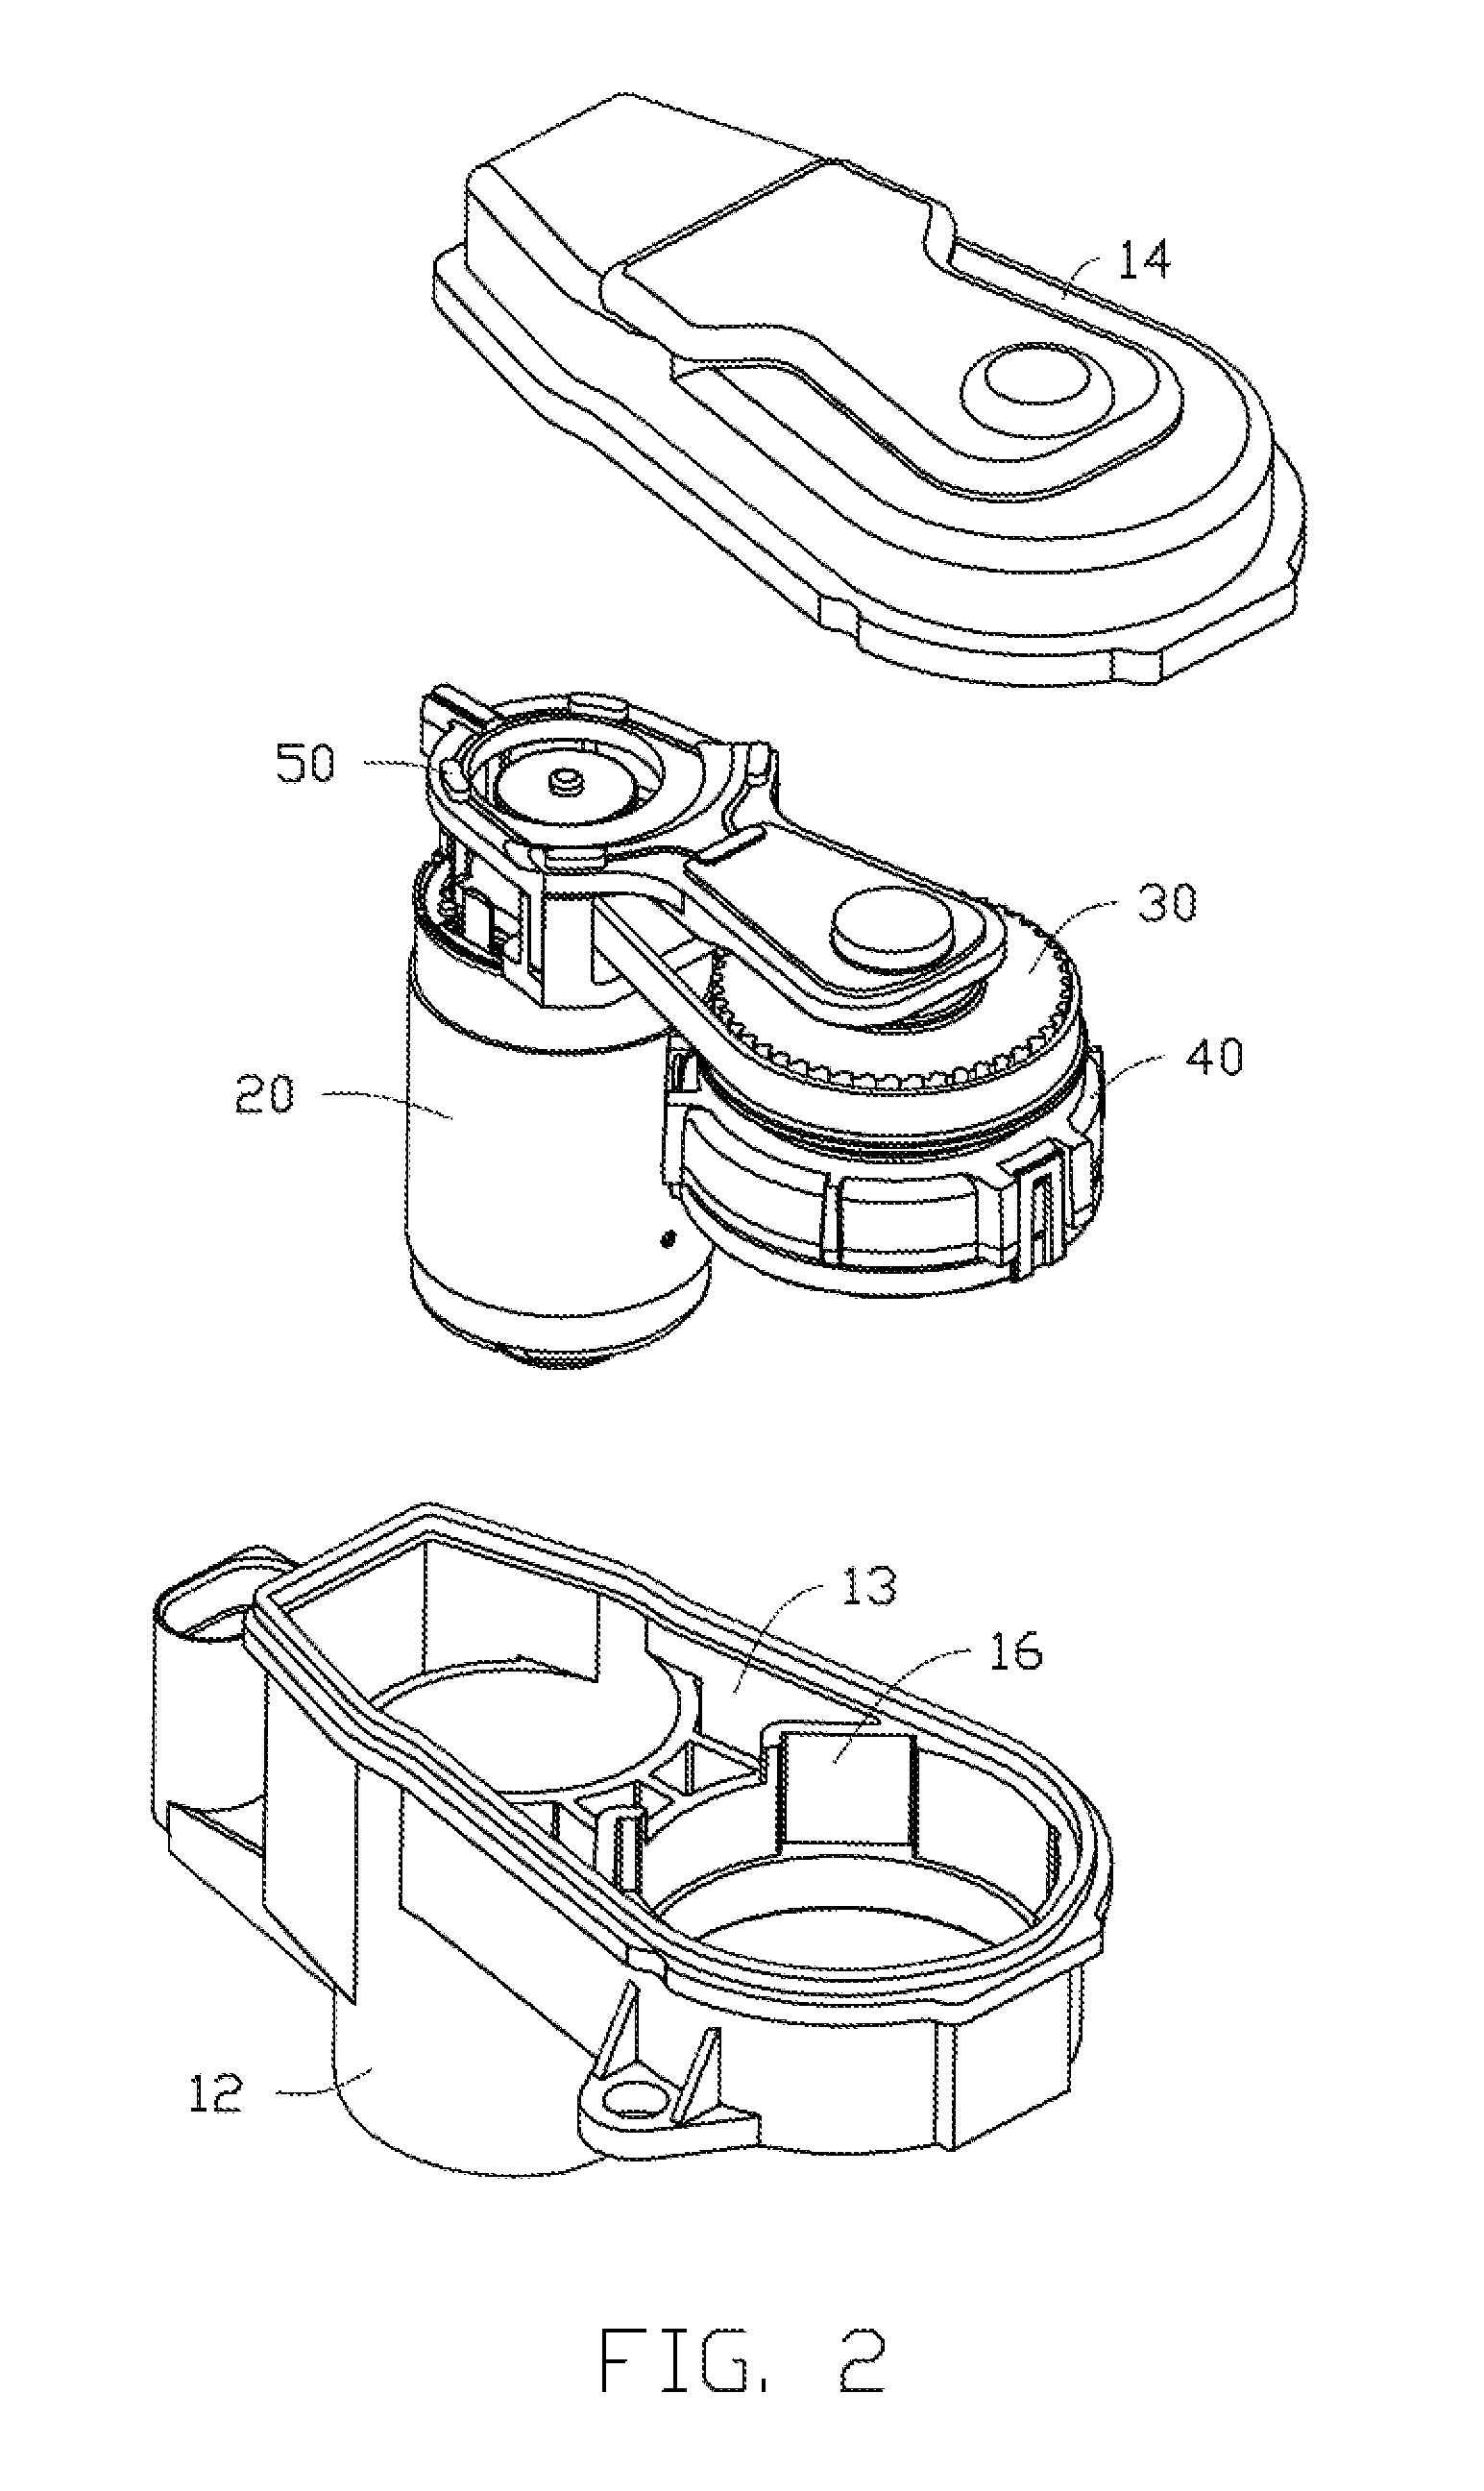 Actuator for an Electric Parking Brake System